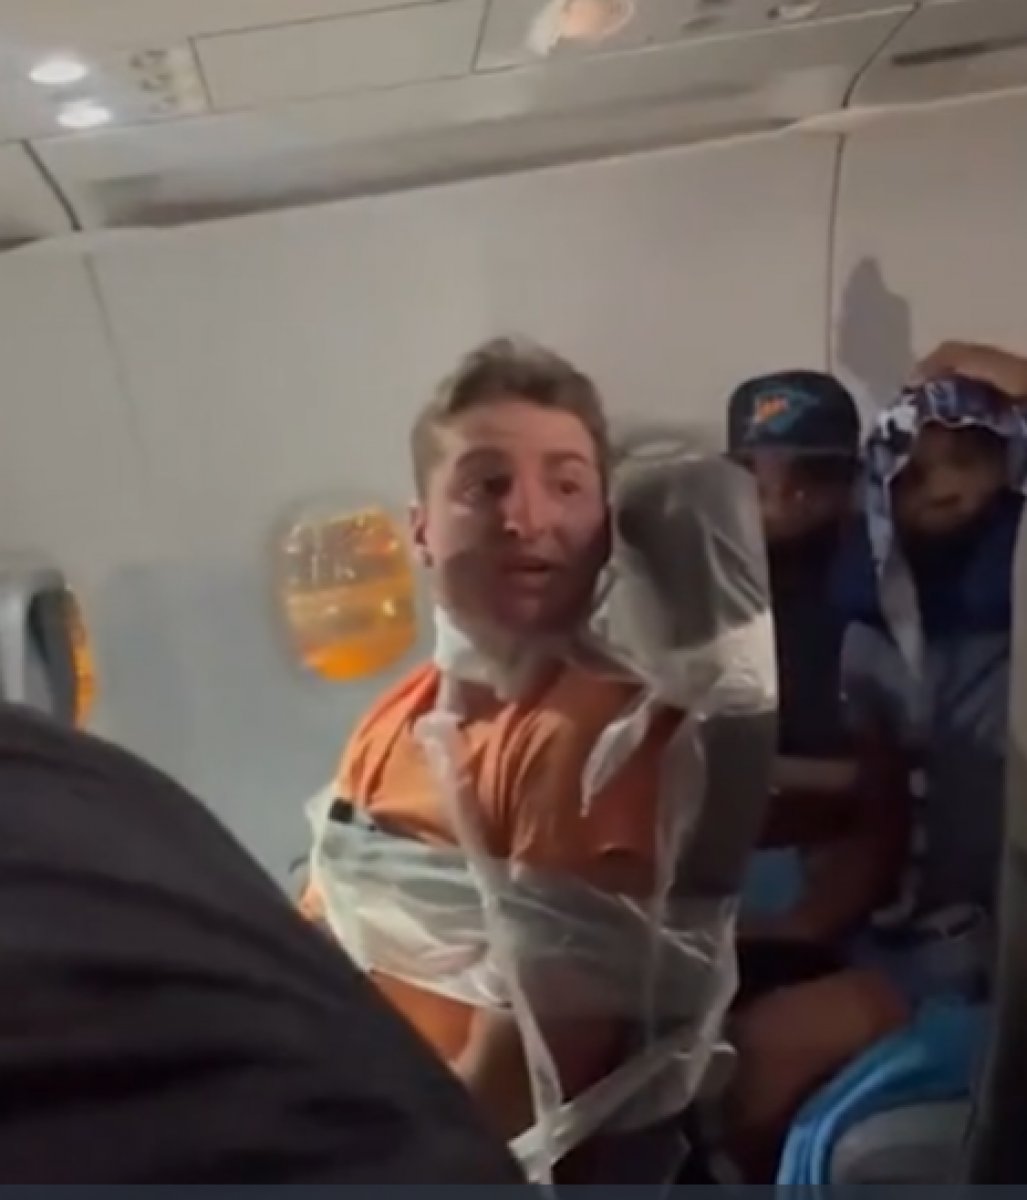 Passenger who harassed the stewardesses on the plane in the USA was taped to the seat #1